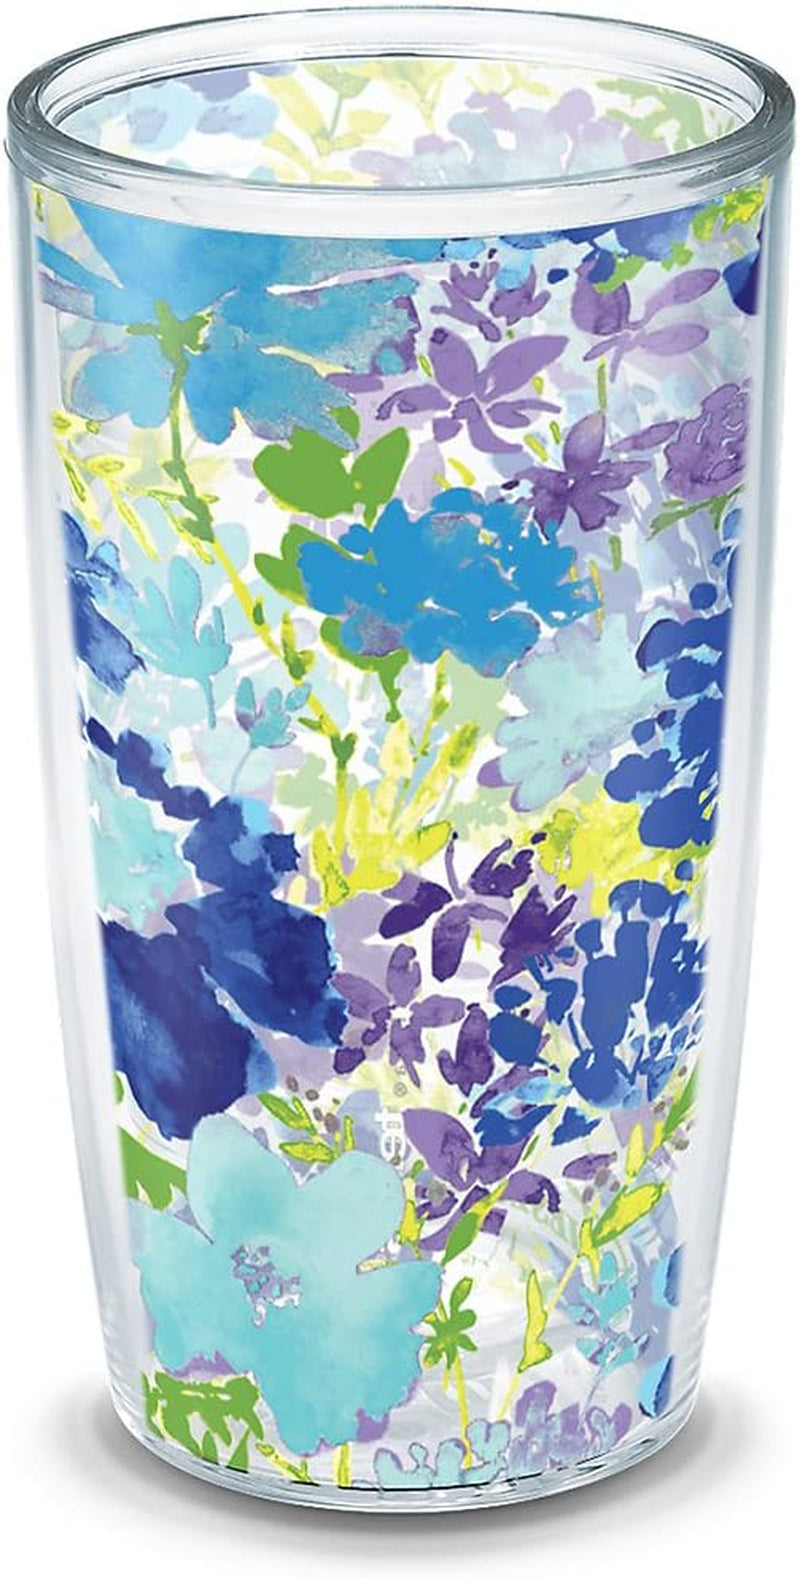 Tervis Made in USA Double Walled Fiesta Insulated Tumbler Cup Keeps Drinks Cold & Hot, 16Oz Mug - Purple Lid, Purple Floral Home & Garden > Kitchen & Dining > Tableware > Drinkware Tervis Classic - Unlidded 16oz 